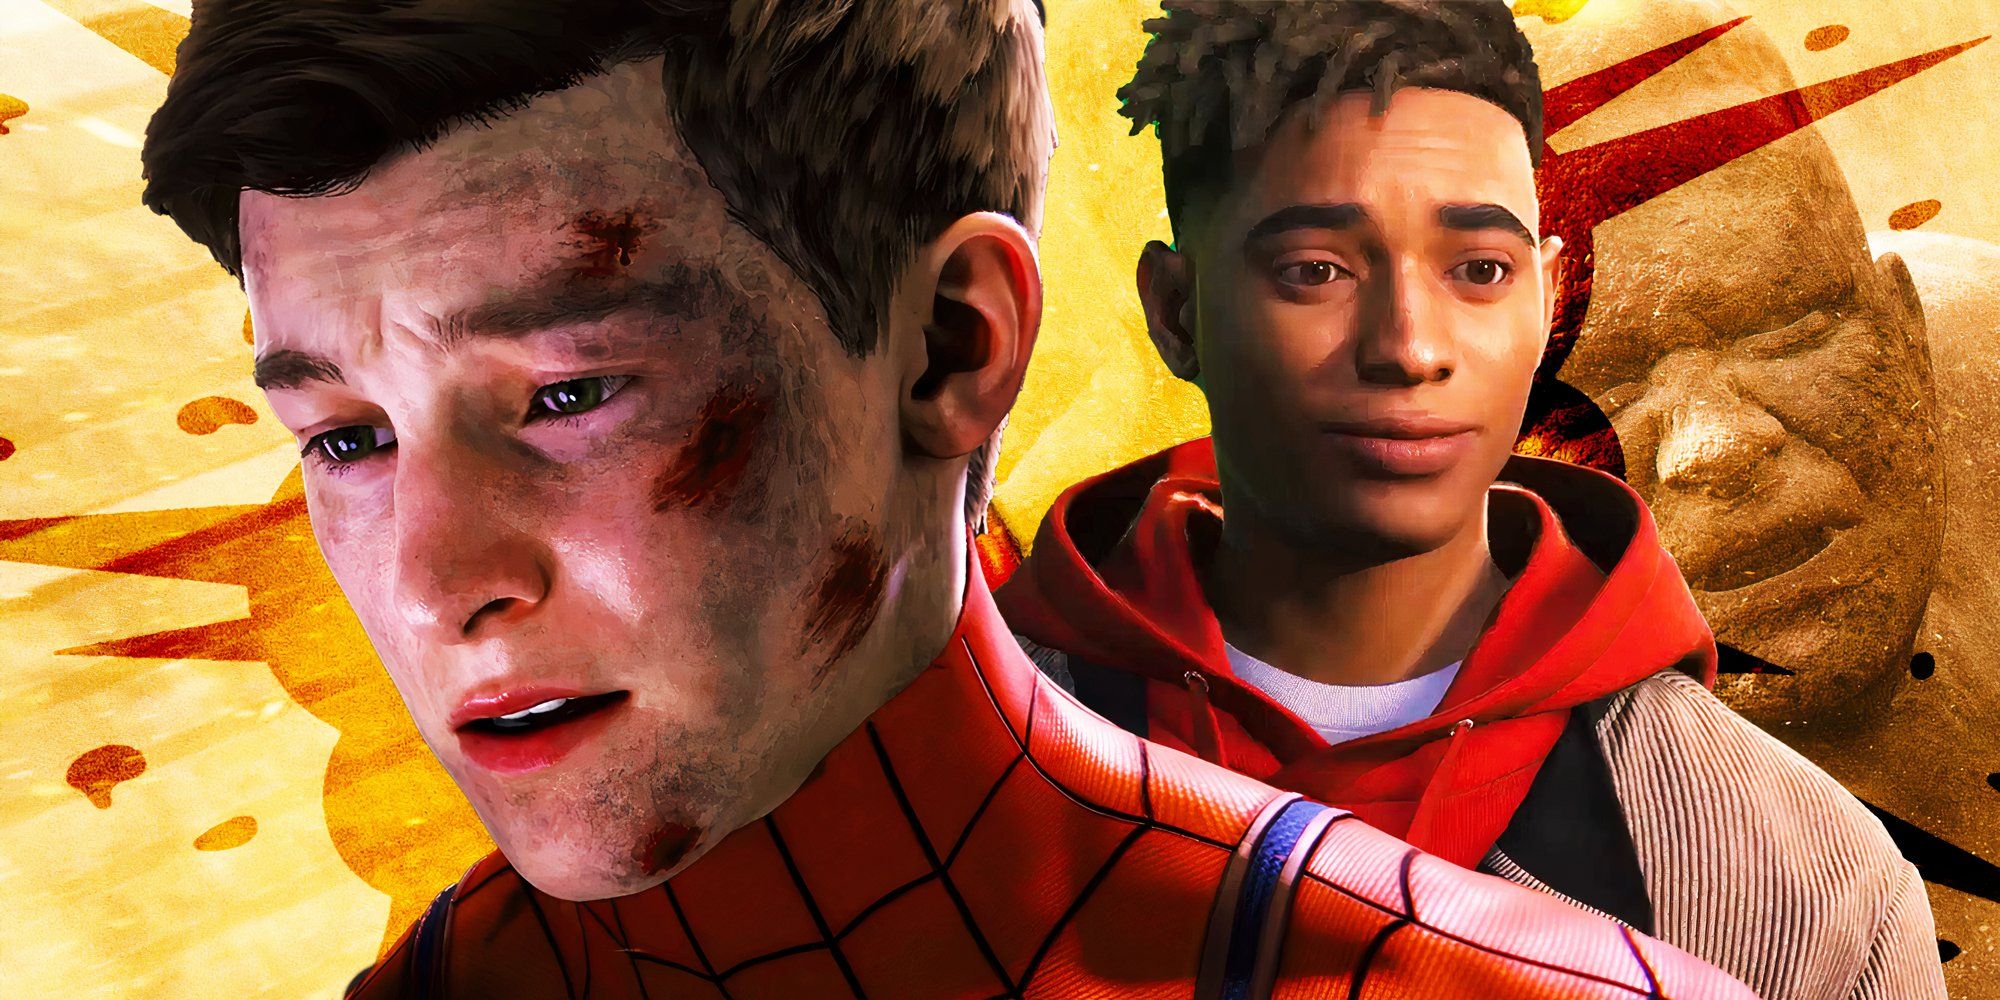 Sad Peter Parker and Miles Morales from Marvel’s Spider-Man 2